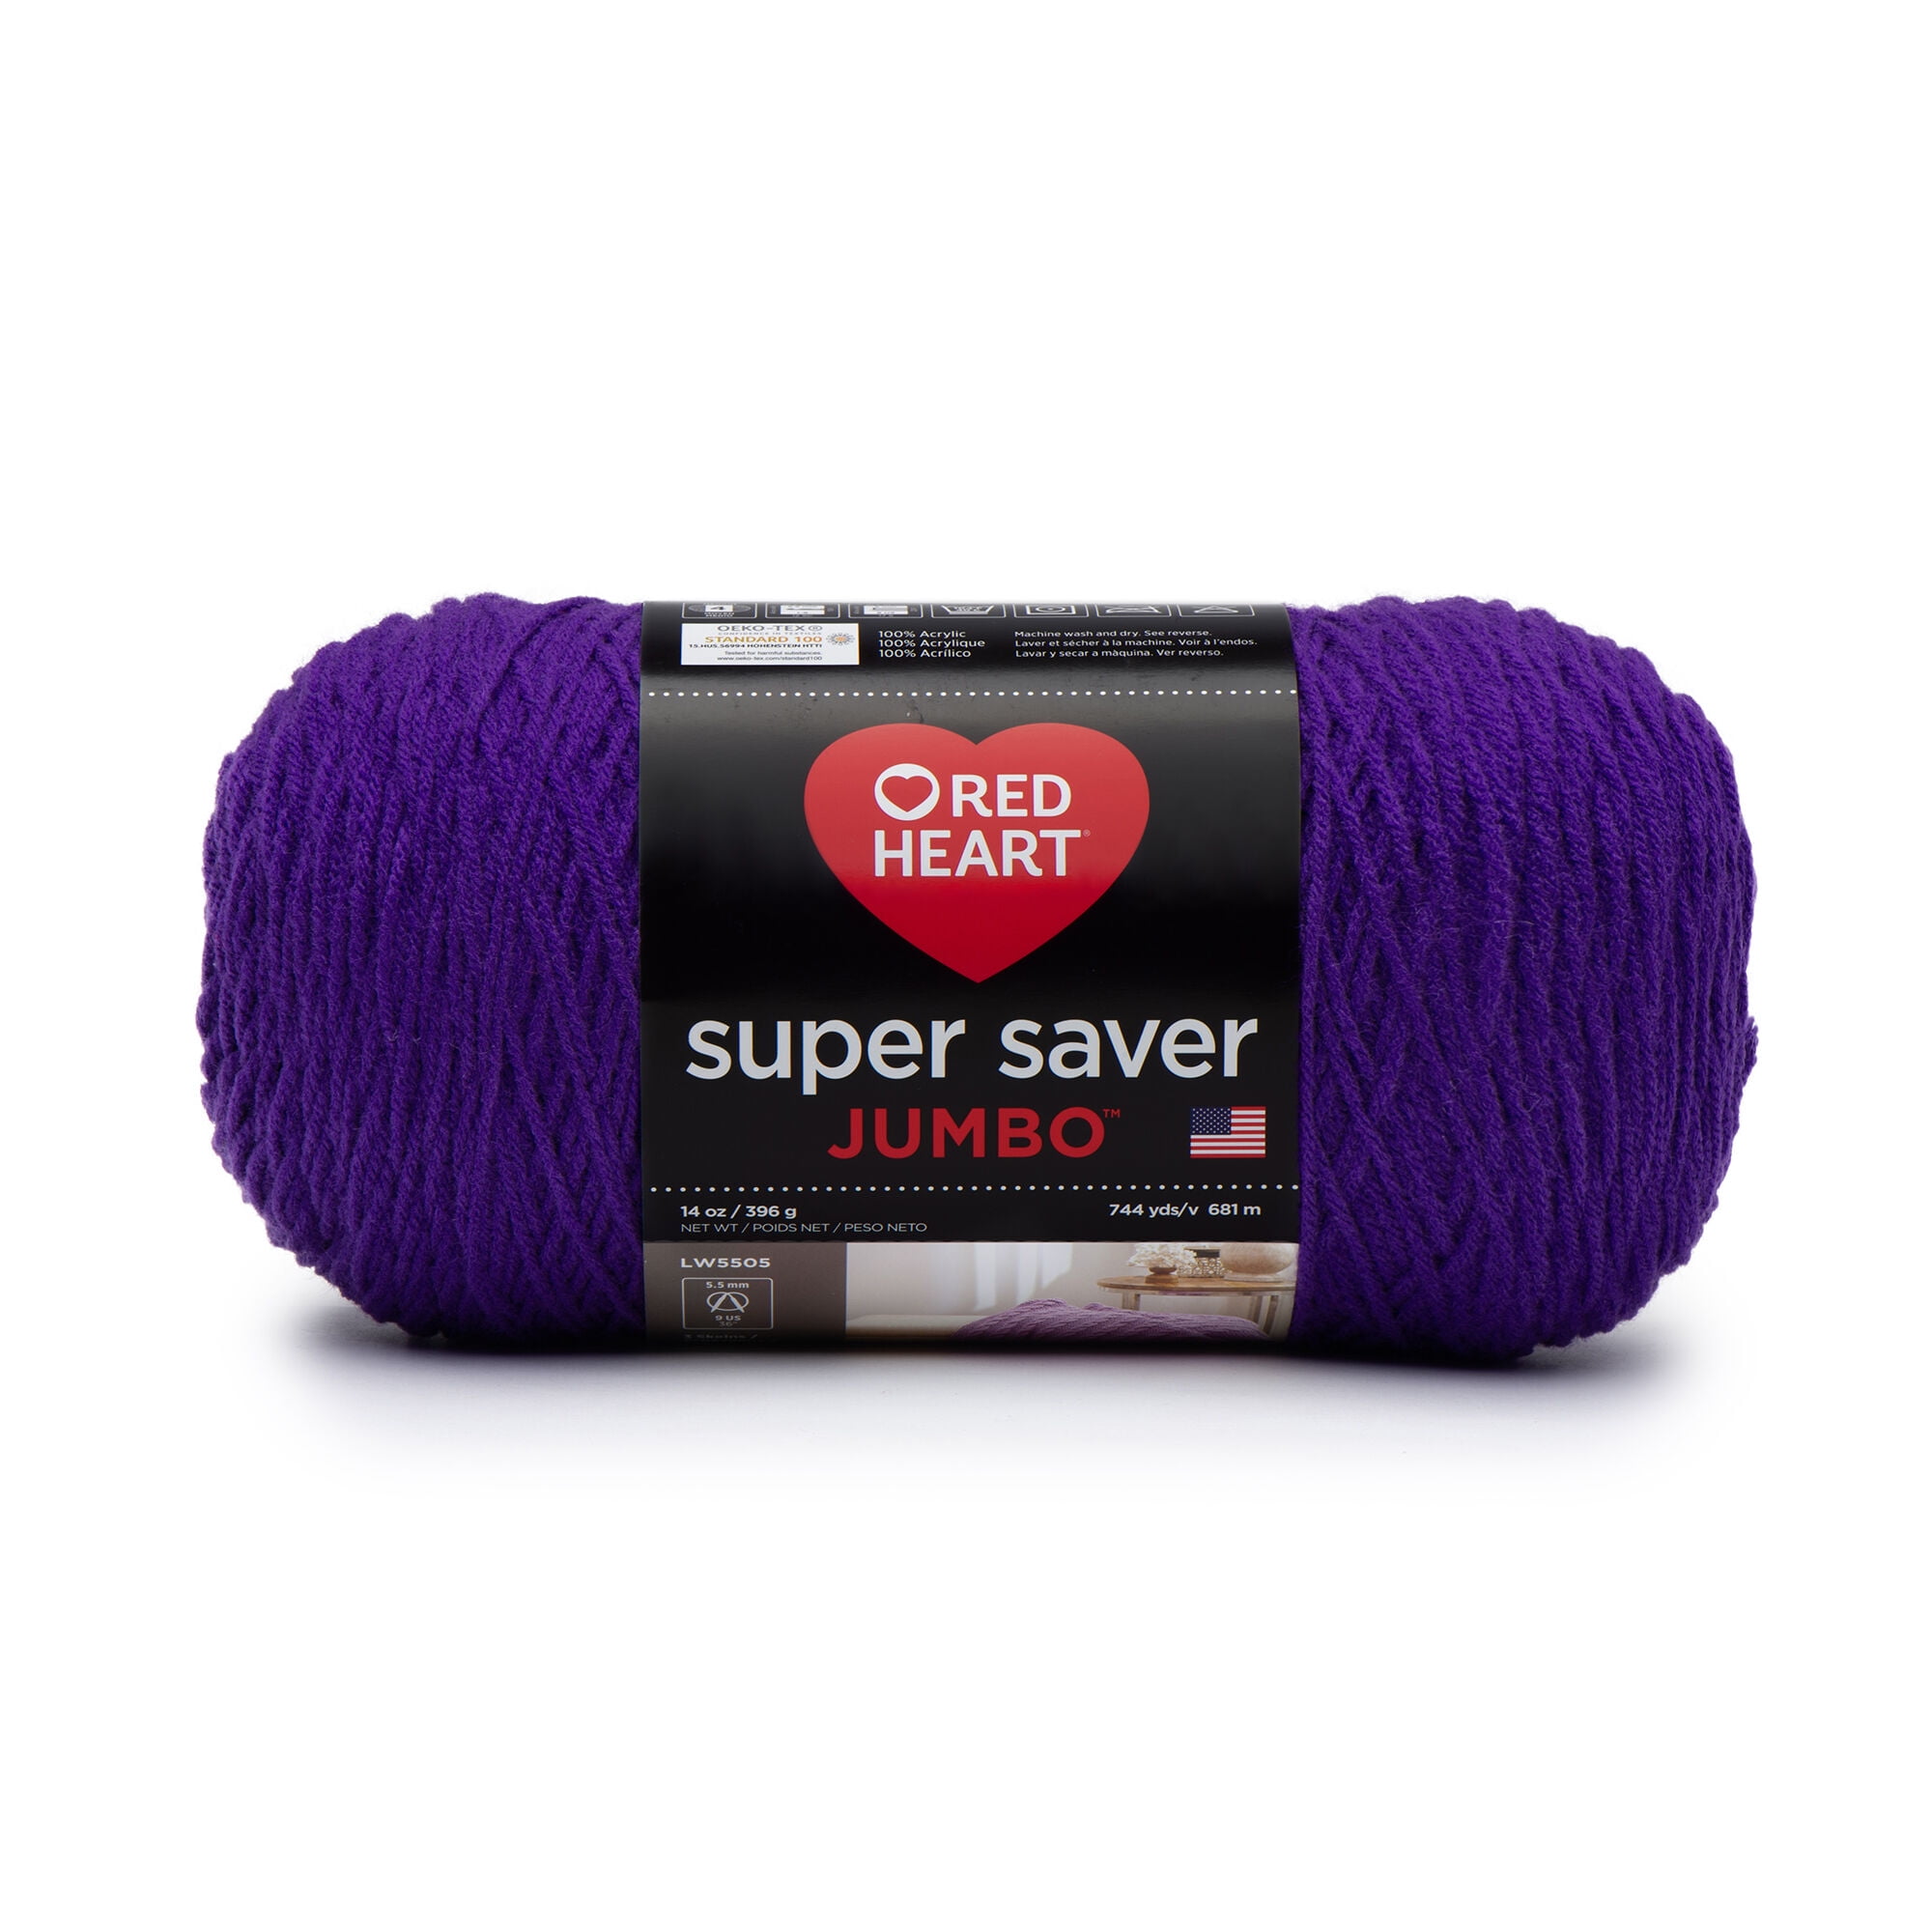 ♥Limited Edition♥ Red Heart Super Saver Jumbo Yarn Cherry Red 